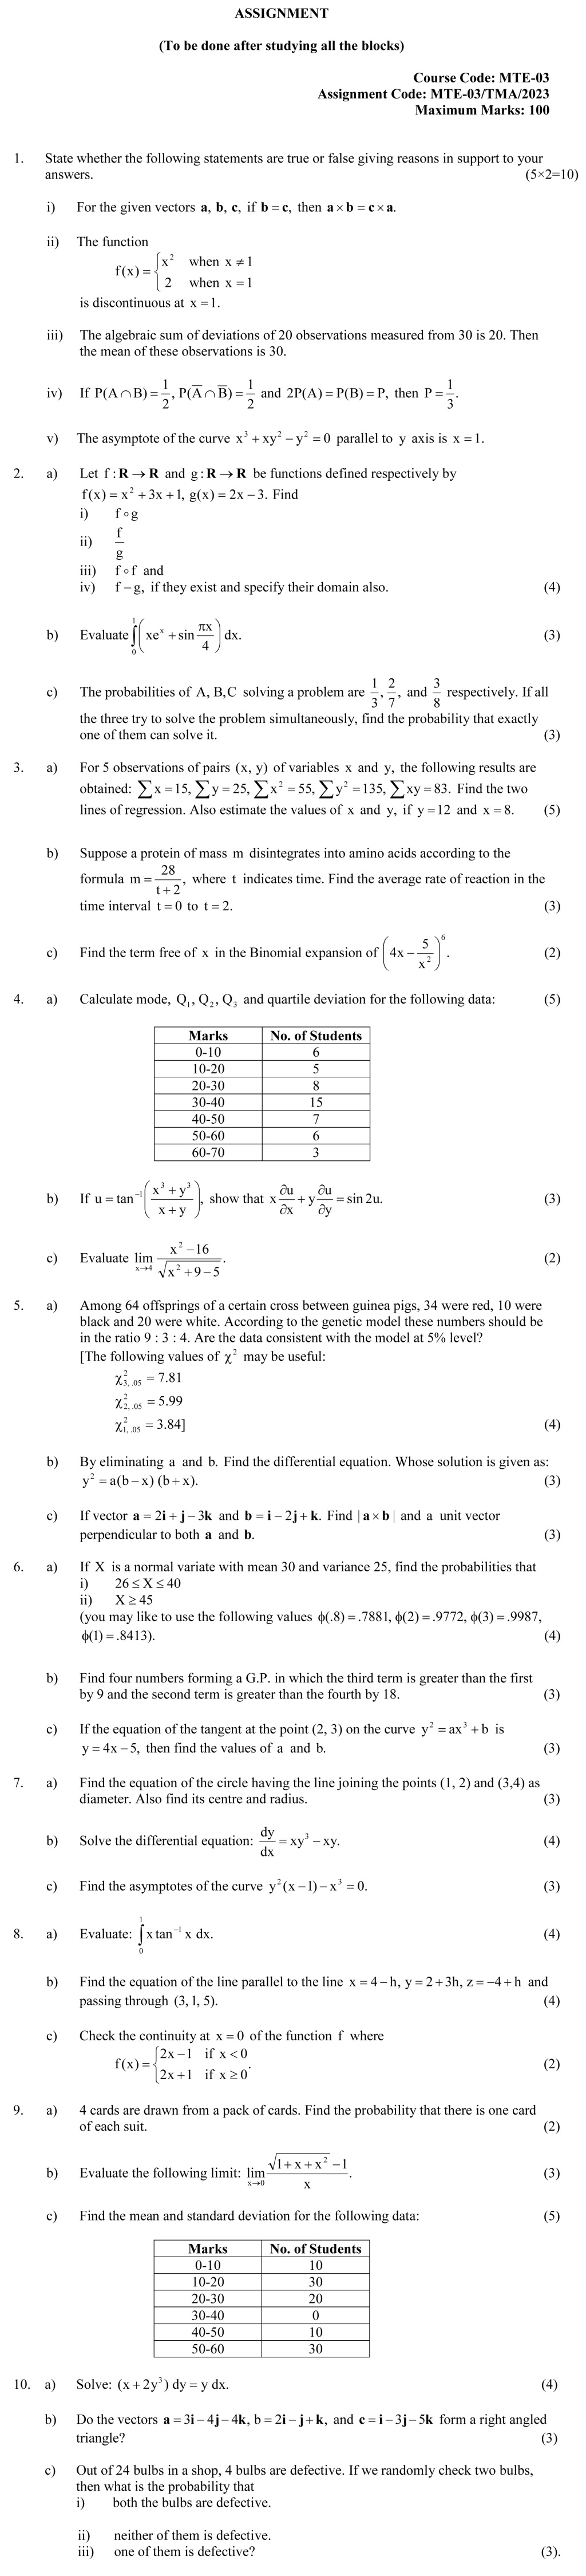 IGNOU MTE-03 - Mathematical Methods, Latest Solved Assignment-January 2023 - December 2023